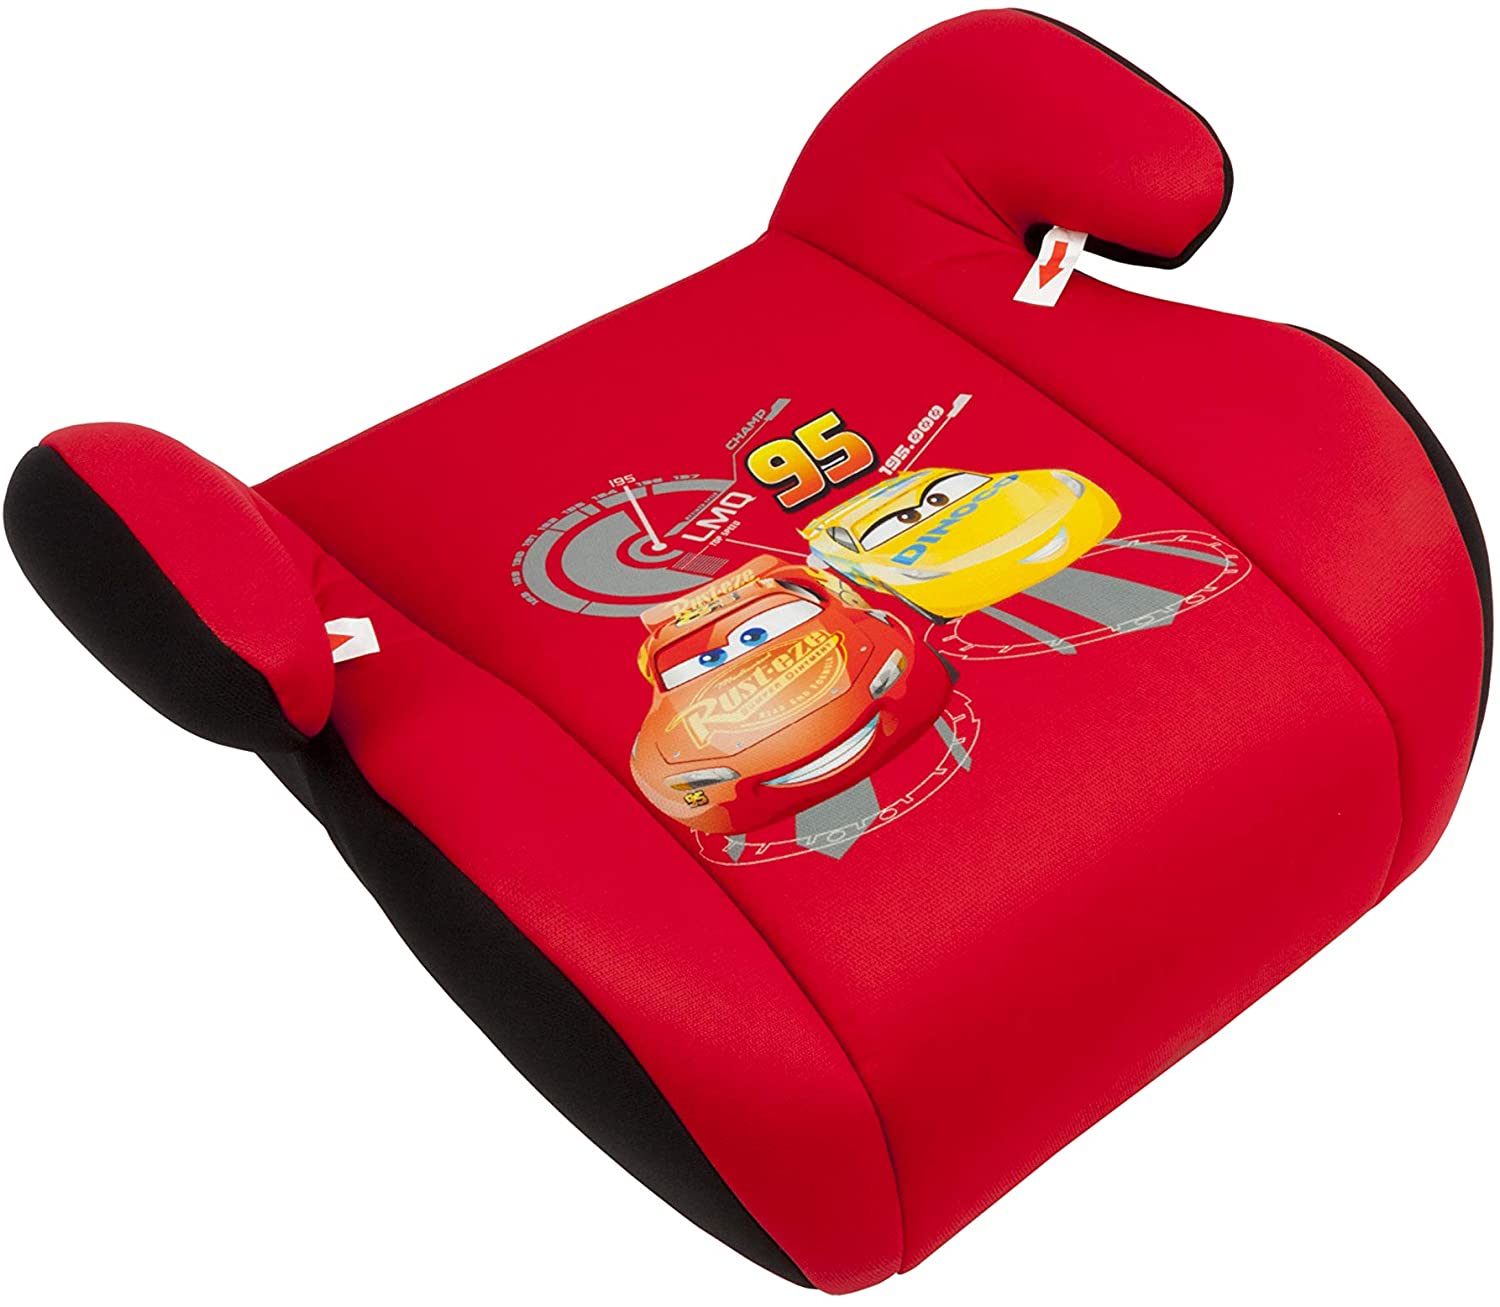 ABC PARTS Disney Cars CARS104 Child Booster Seat